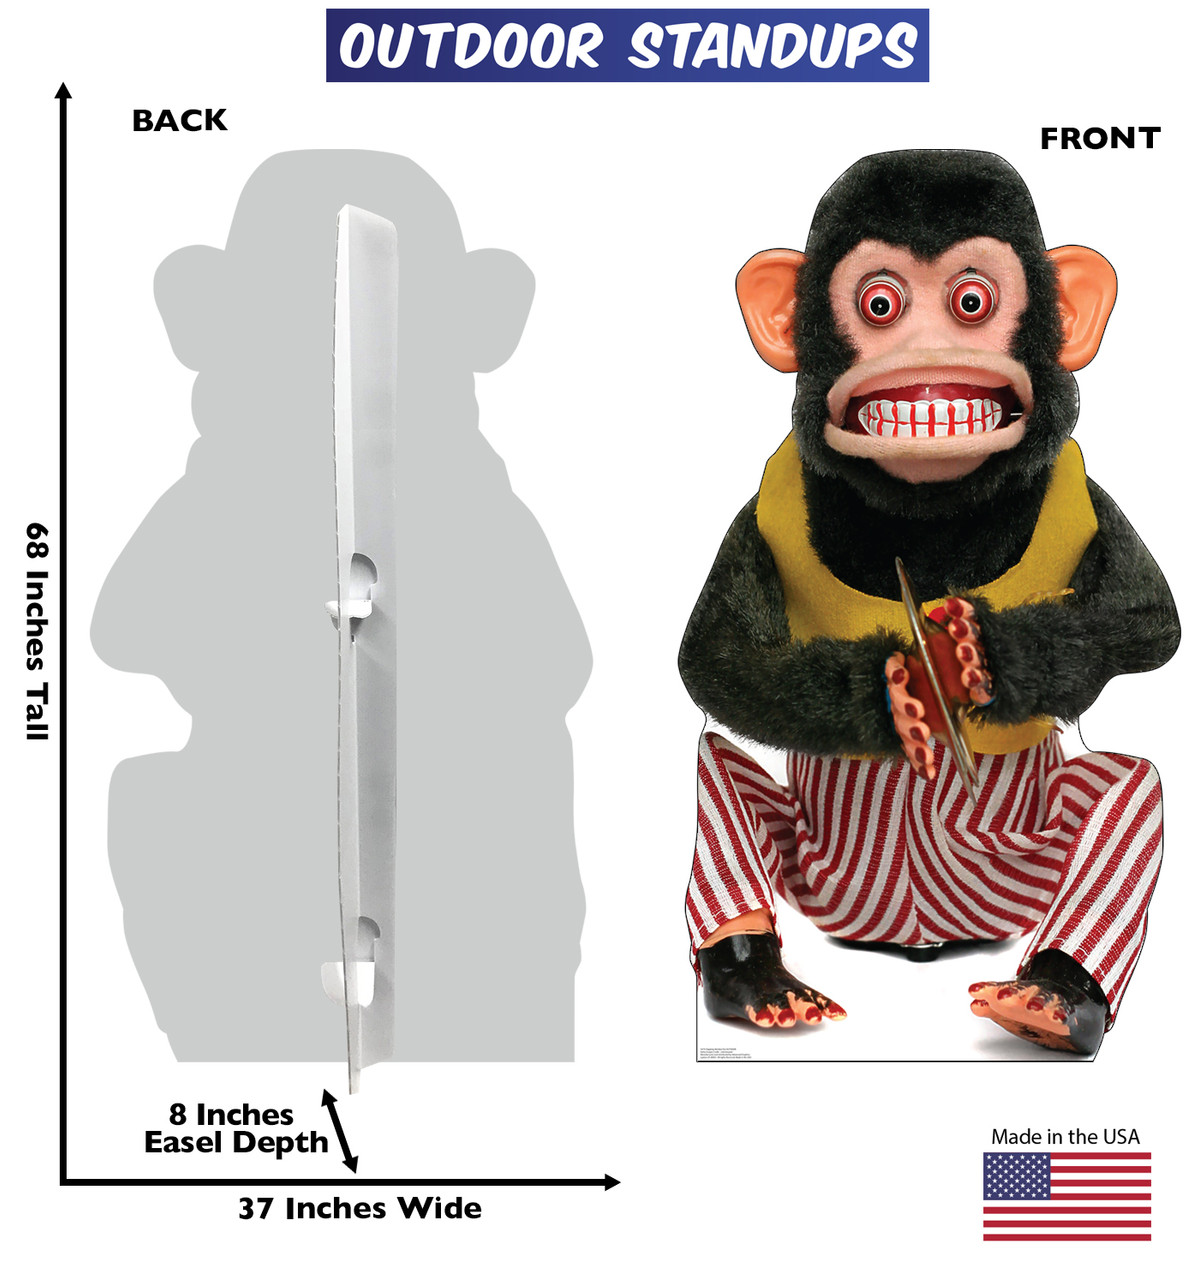 Clapping Monkey Outdoor Standee with Front and Back Dimensions.